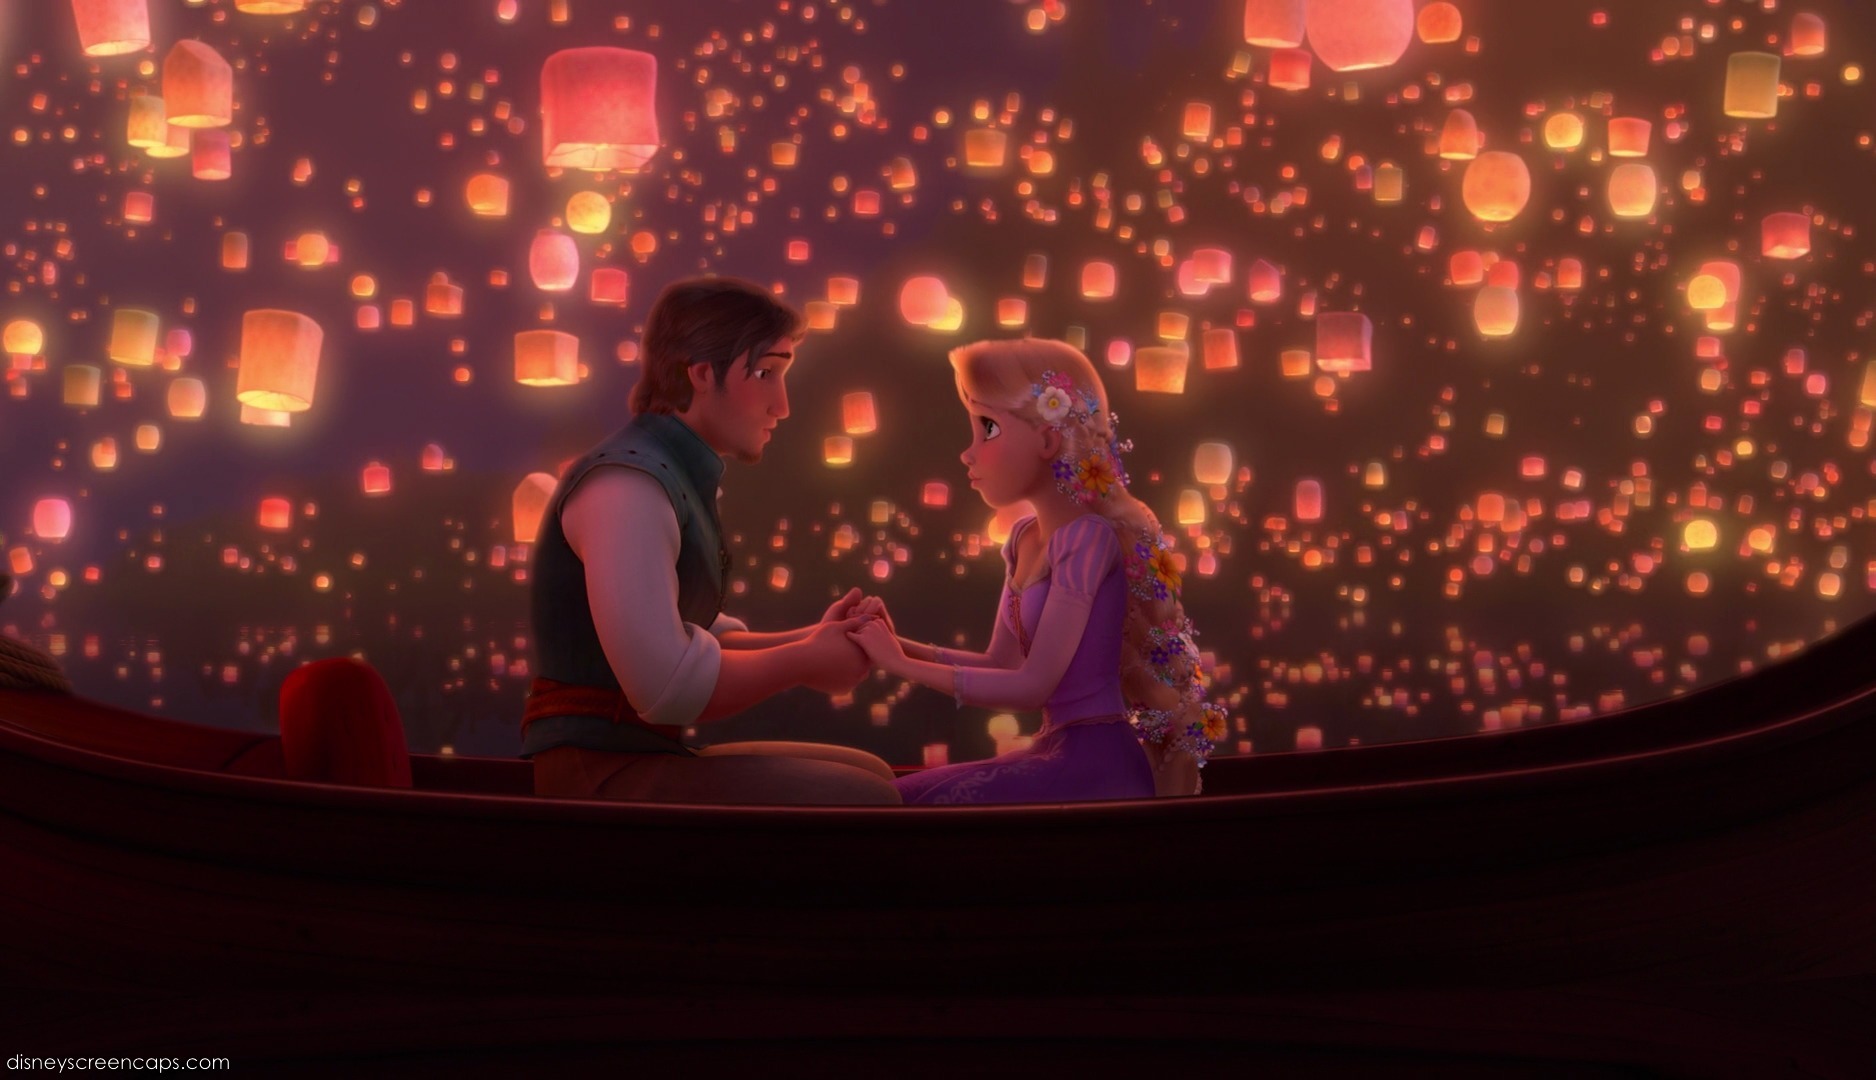 tangled coloring pages floating lights scene - photo #19